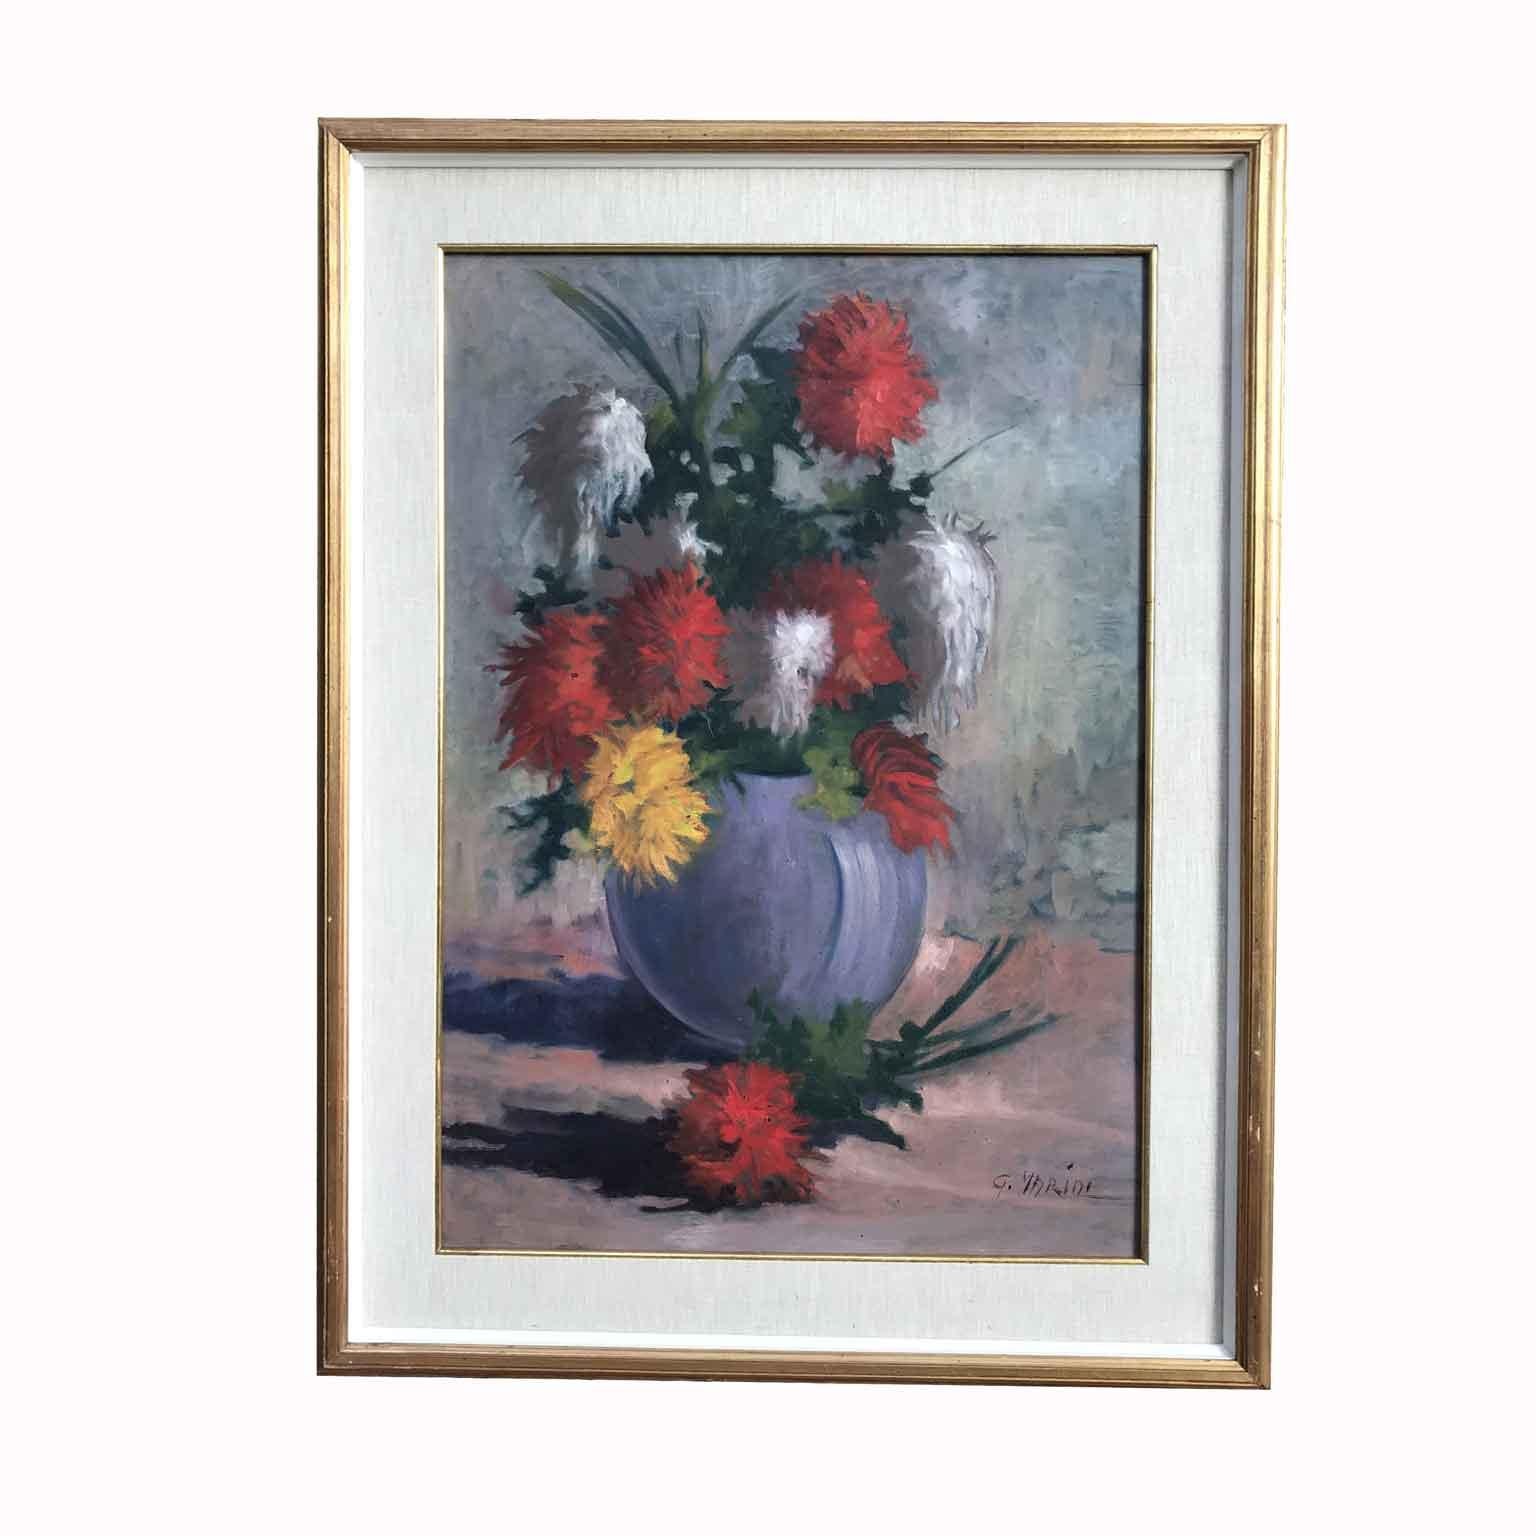 A flowers painting an Italian polychrome shiny colors flower composition, a 20th century Italian still-life of flowers, oil painted on wooden panel, signed lower left G.MARINI, a dahlia flower composition set in a blue pottery vase.

This young